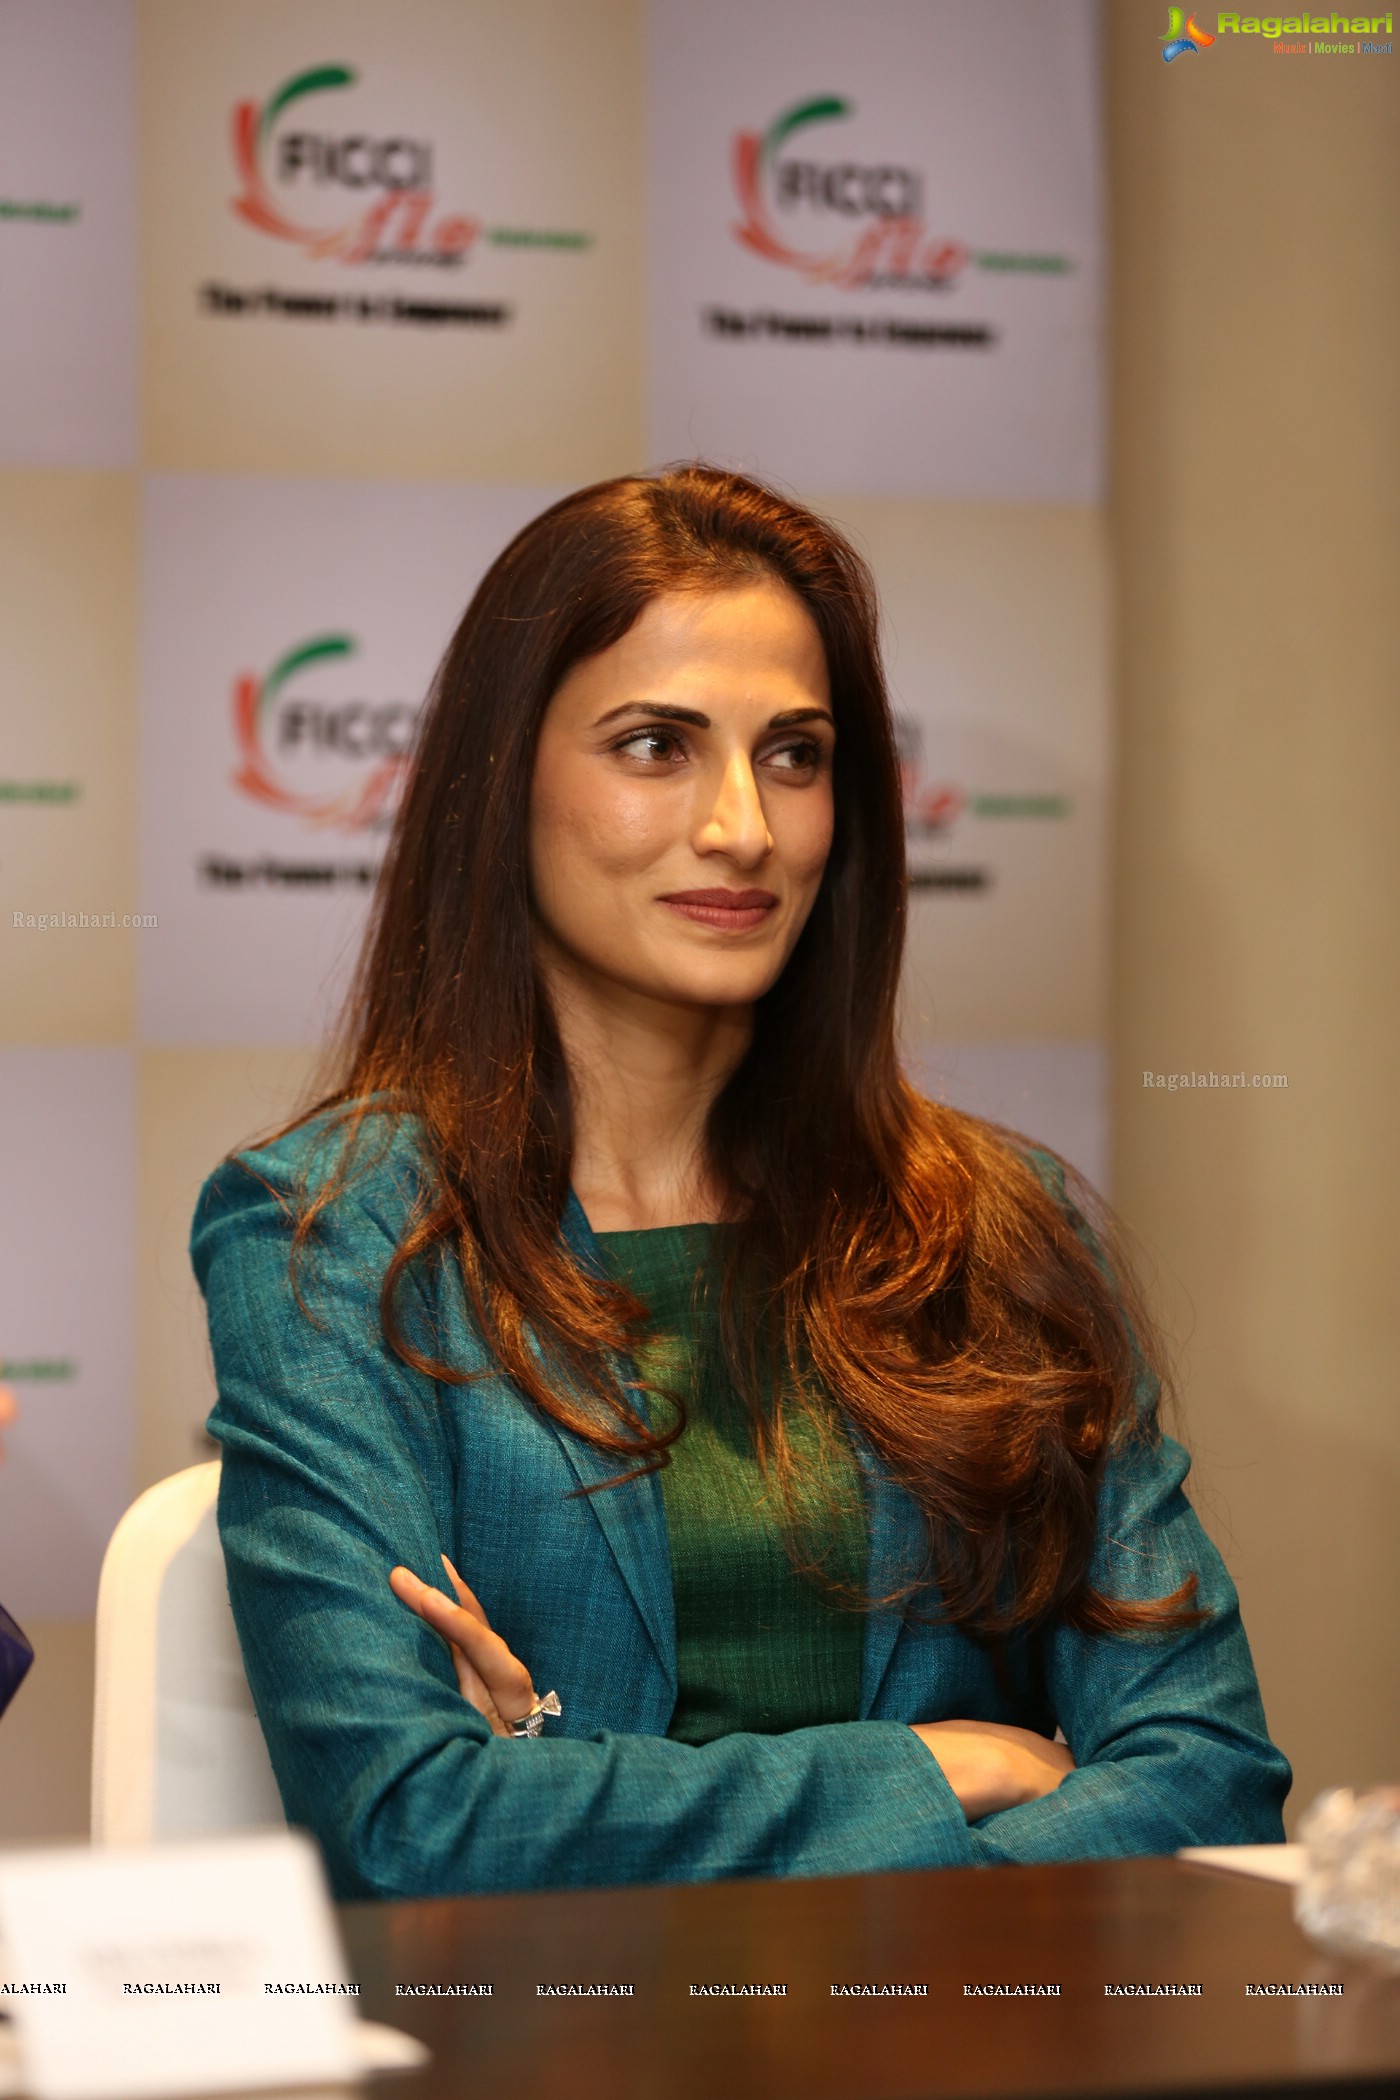 Shilpa Reddy at Young FICCI Ladies Organization (YFLO) Event, Hyderabad (Posters)